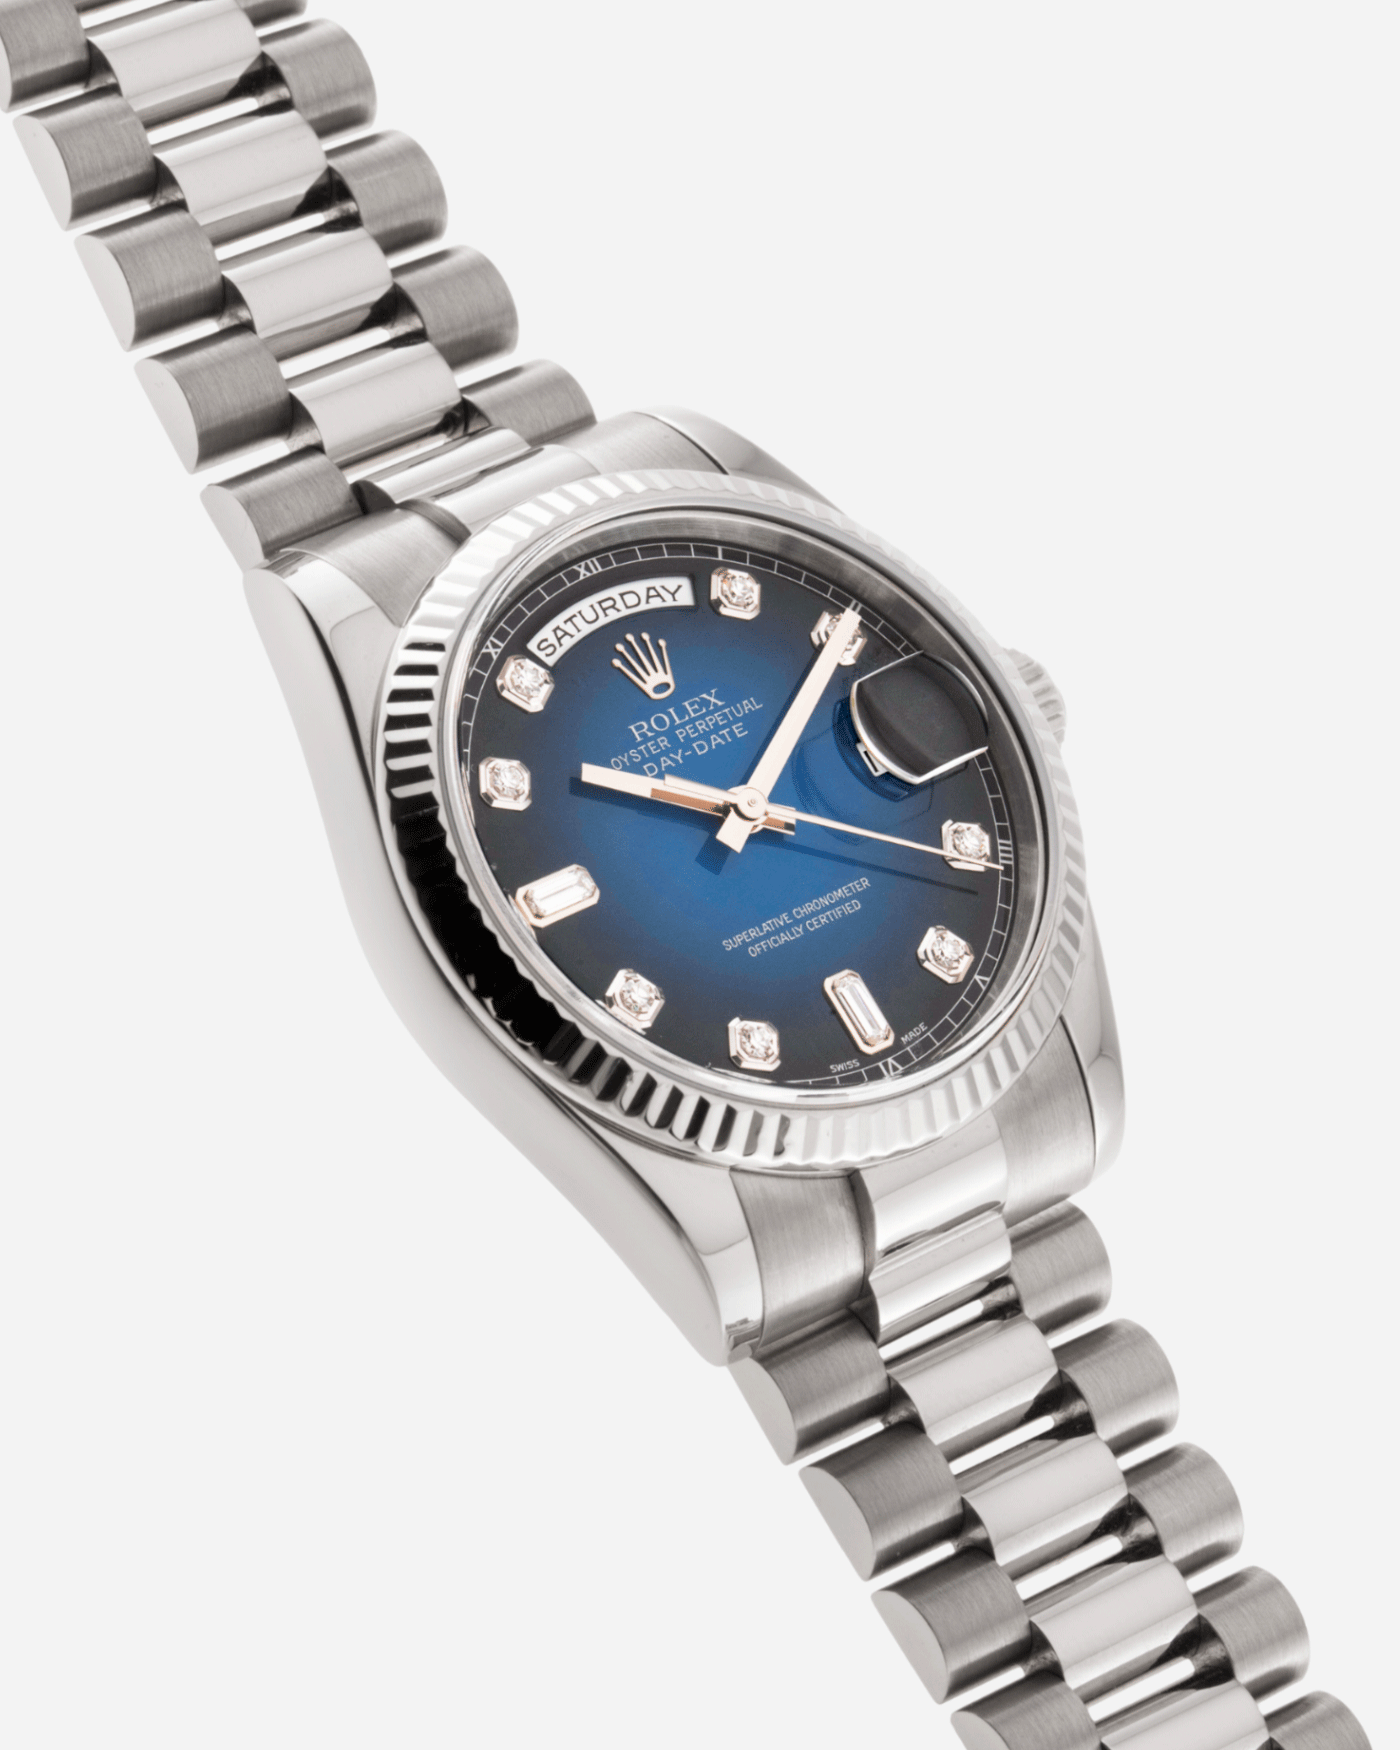 Brand: Rolex Year: 2000 Model: Day Date Reference Number: 118239 Serial Number: P Serial Material: 18k White Gold Movement: Cal. 3155 Case Diameter: 36mm Lug Width: 20mm Bracelet/Strap: Rolex 18k White Gold 83859 President Bracelet